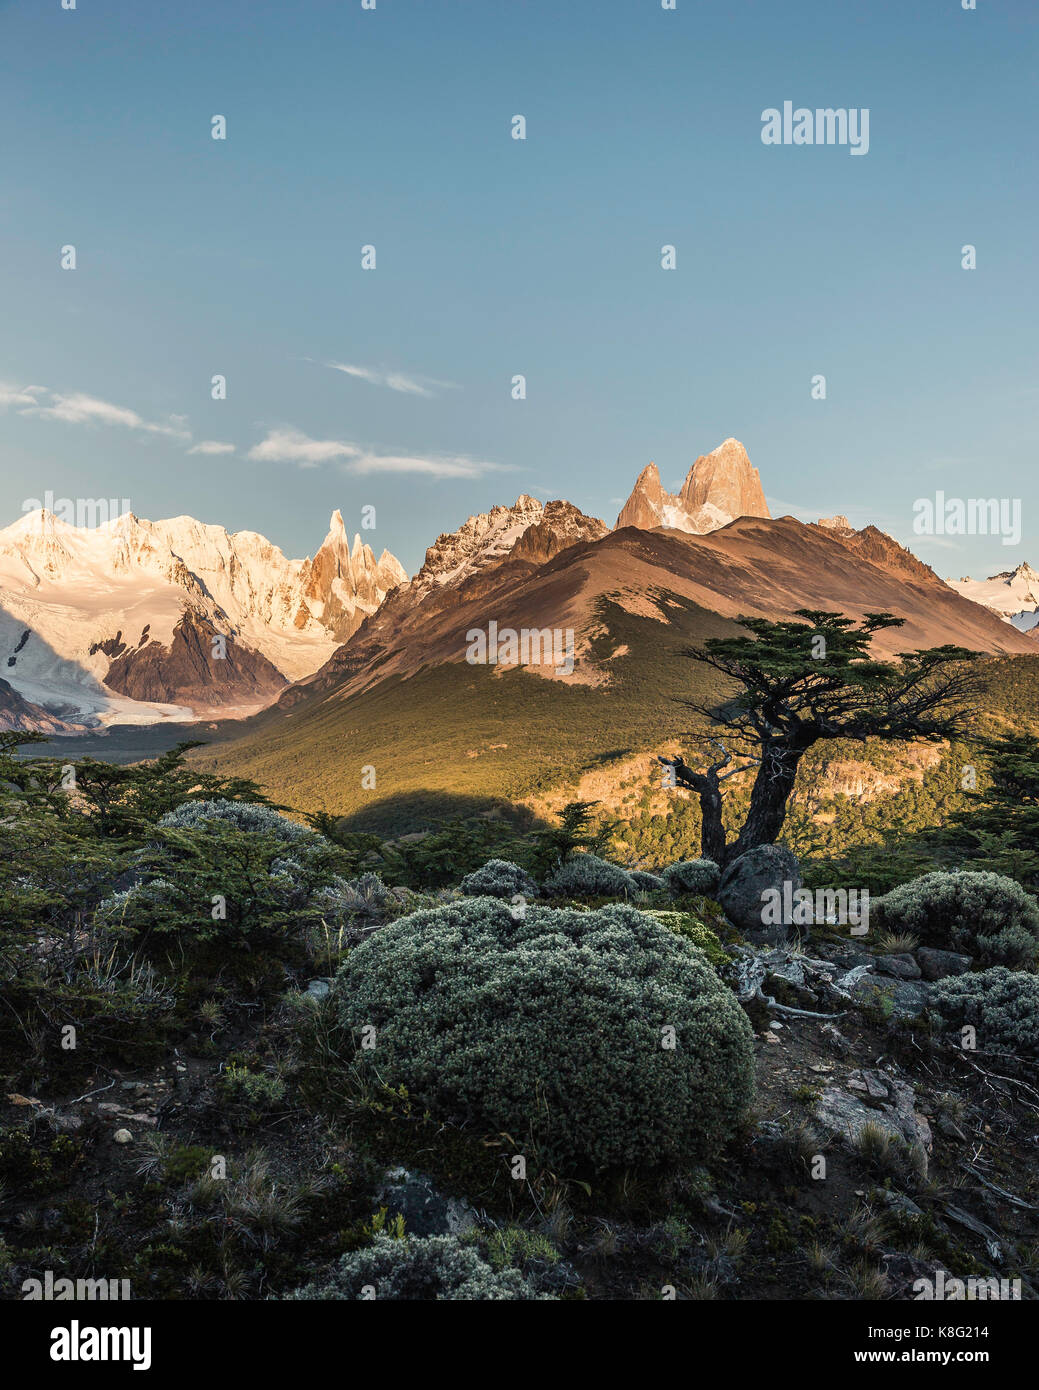 Distant view of Cerro Torre and Fitz Roy mountain ranges, Los Glaciares National Park, Patagonia, Argentina Stock Photo